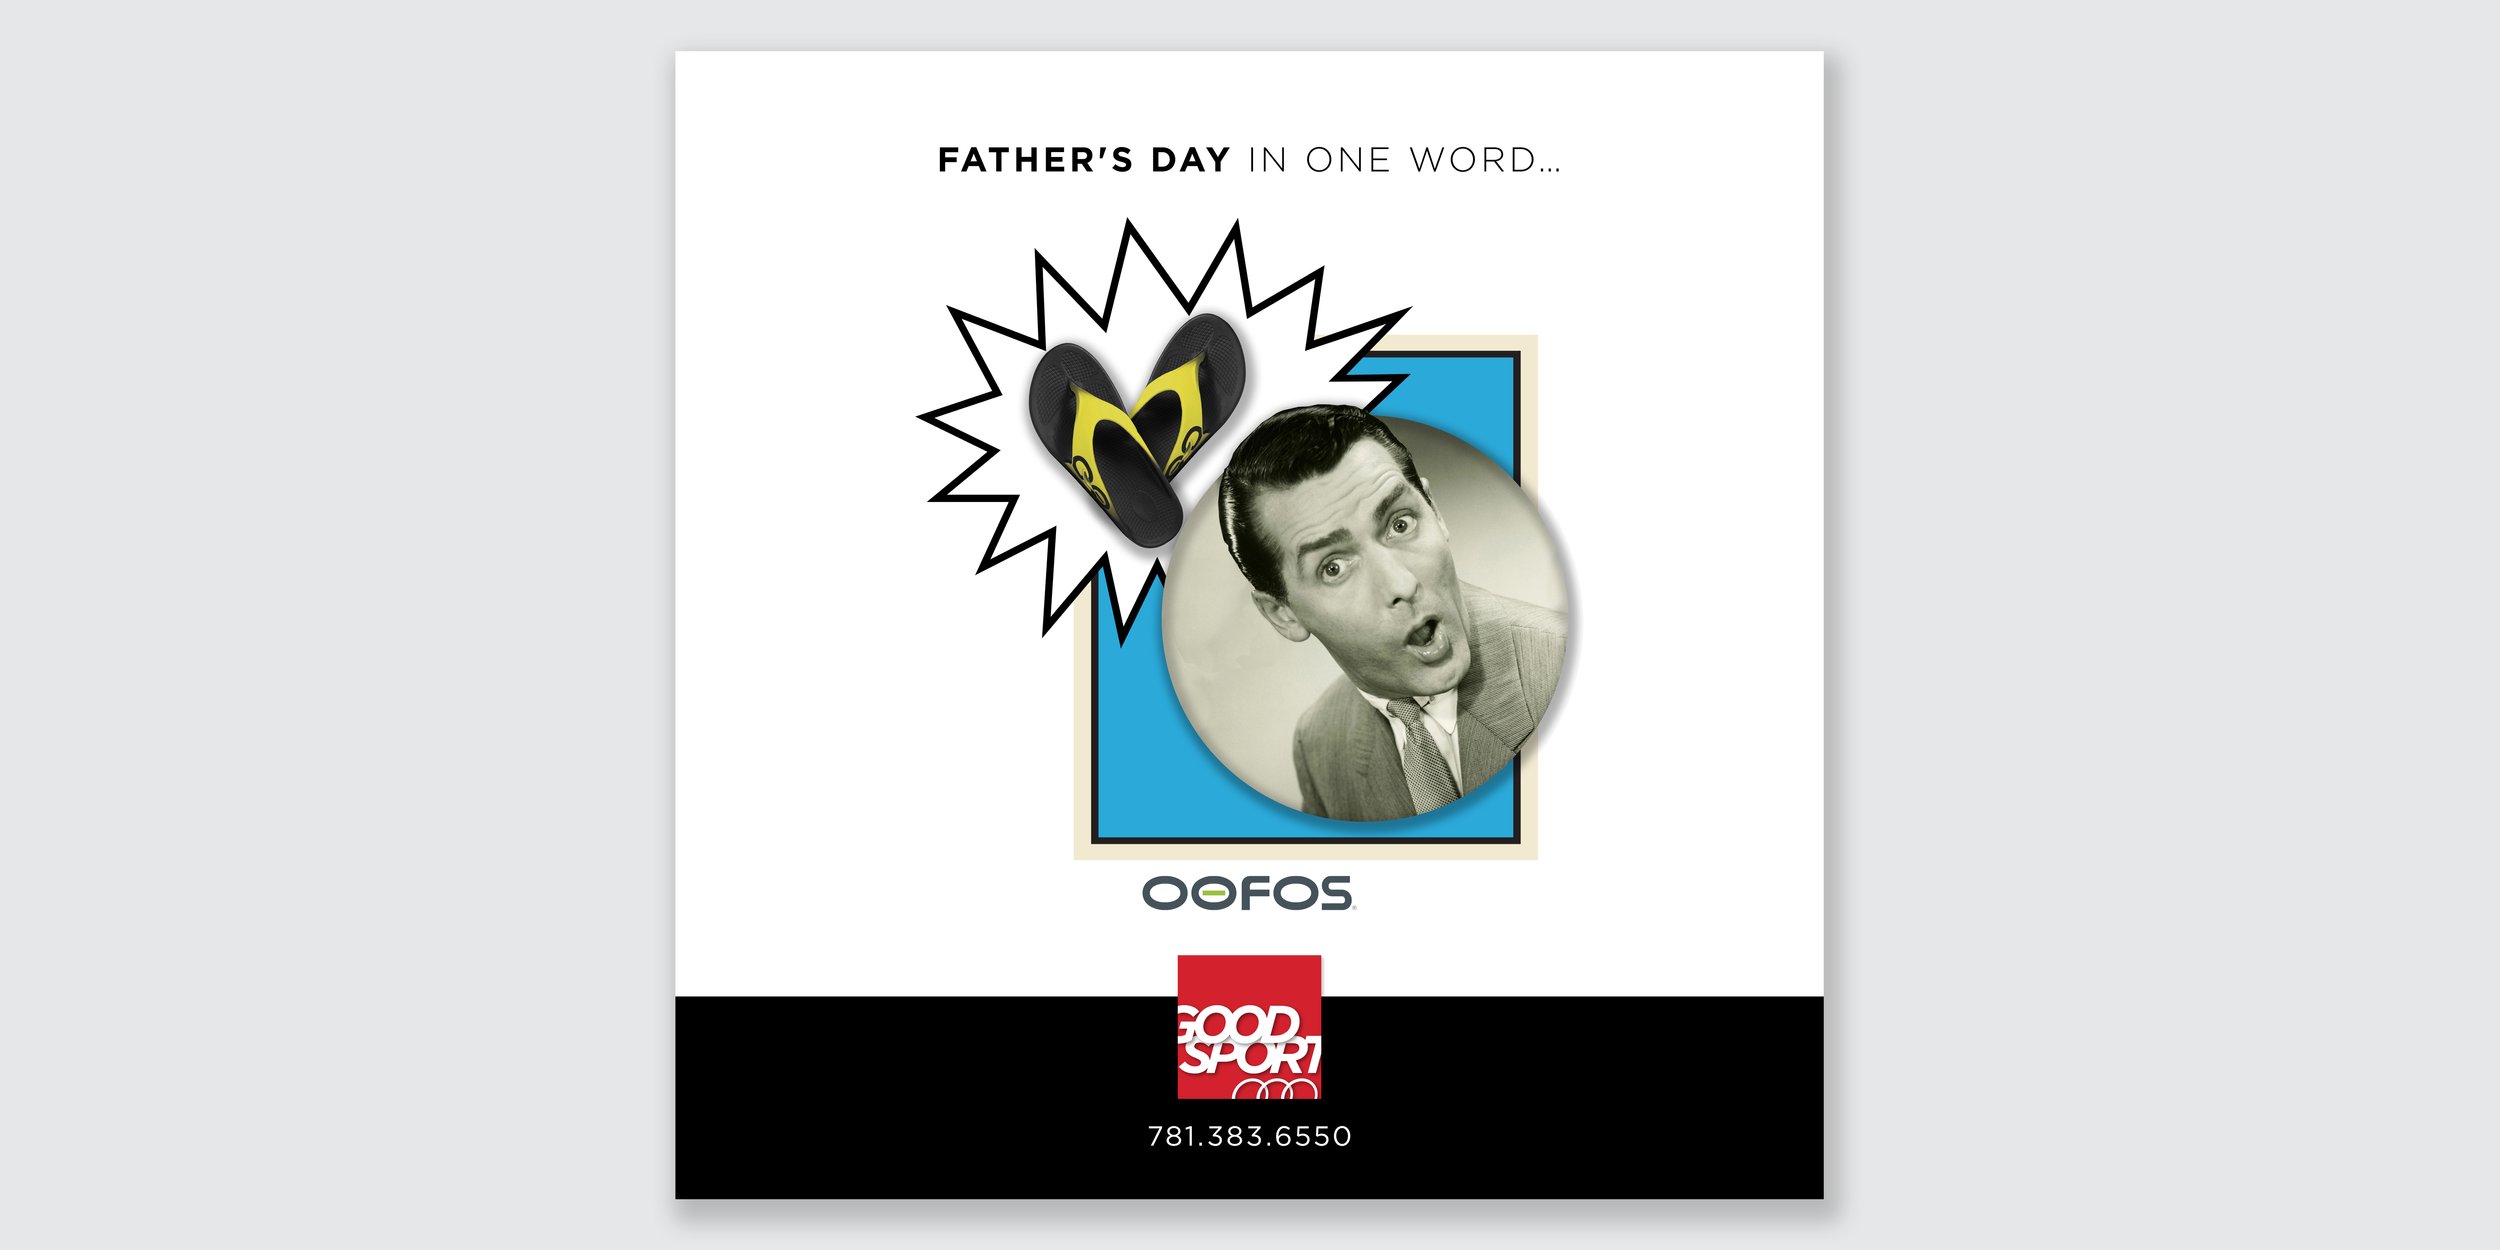 OOFOS :: Father's Day reminder